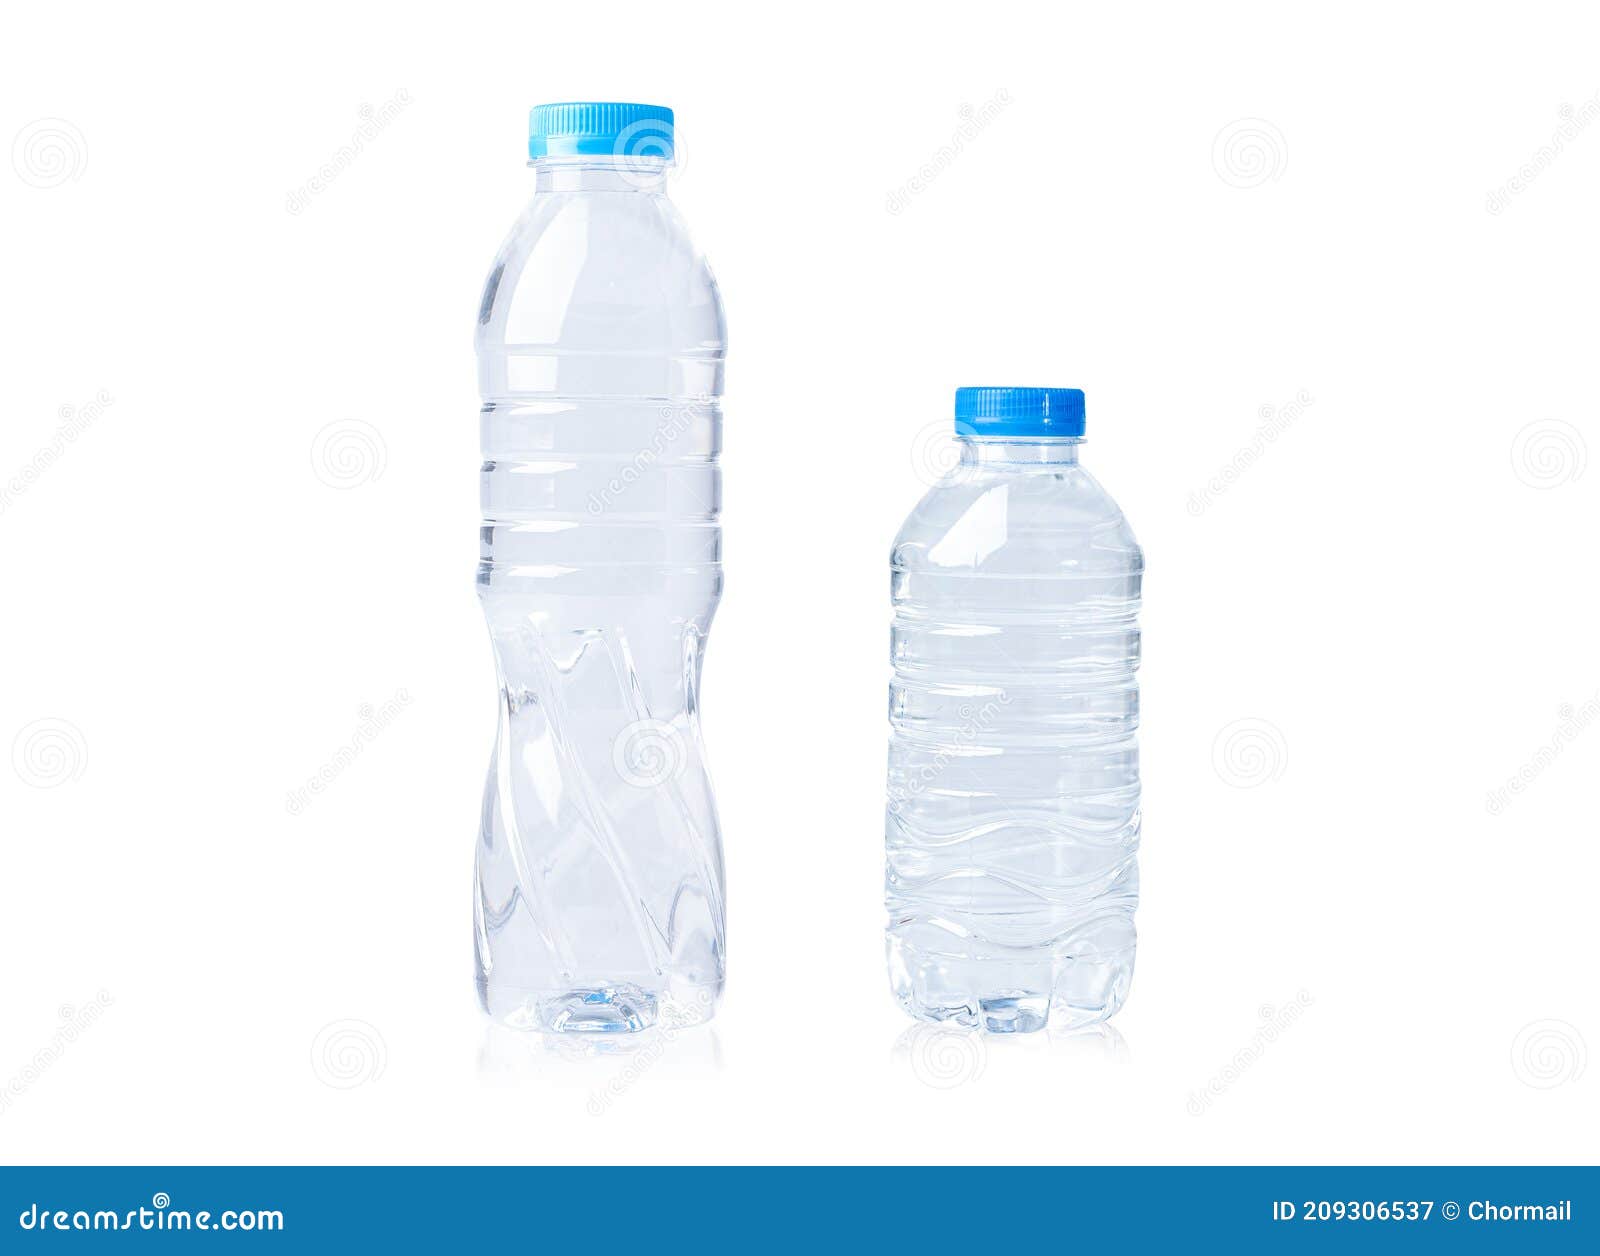 Plastic Water Bottle Sizes by .